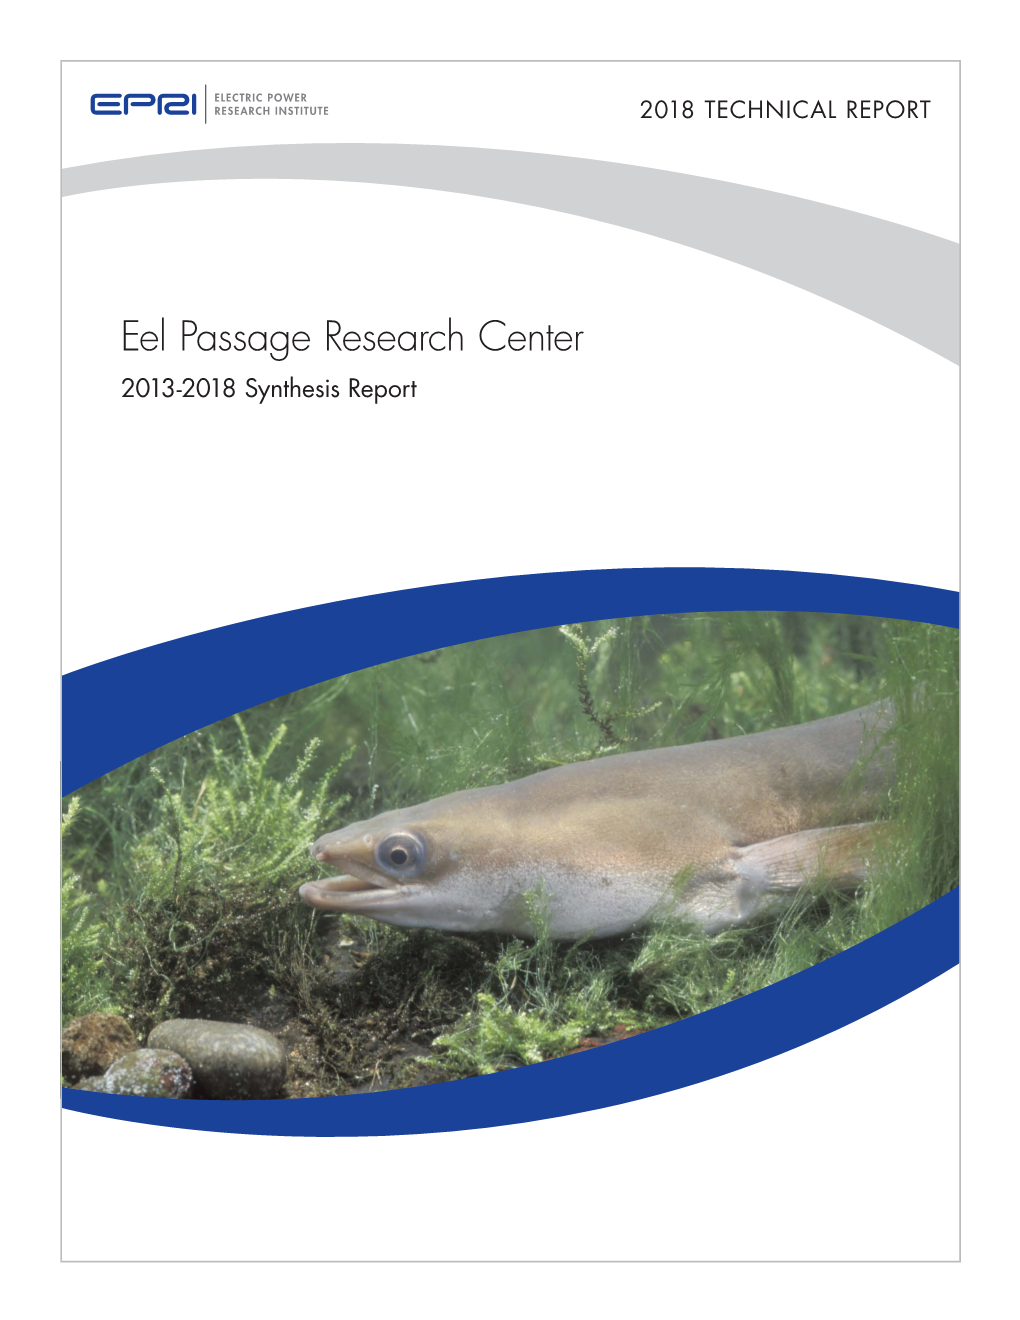 Eel Passage Research Center: 2013-2018 Synthesis Report